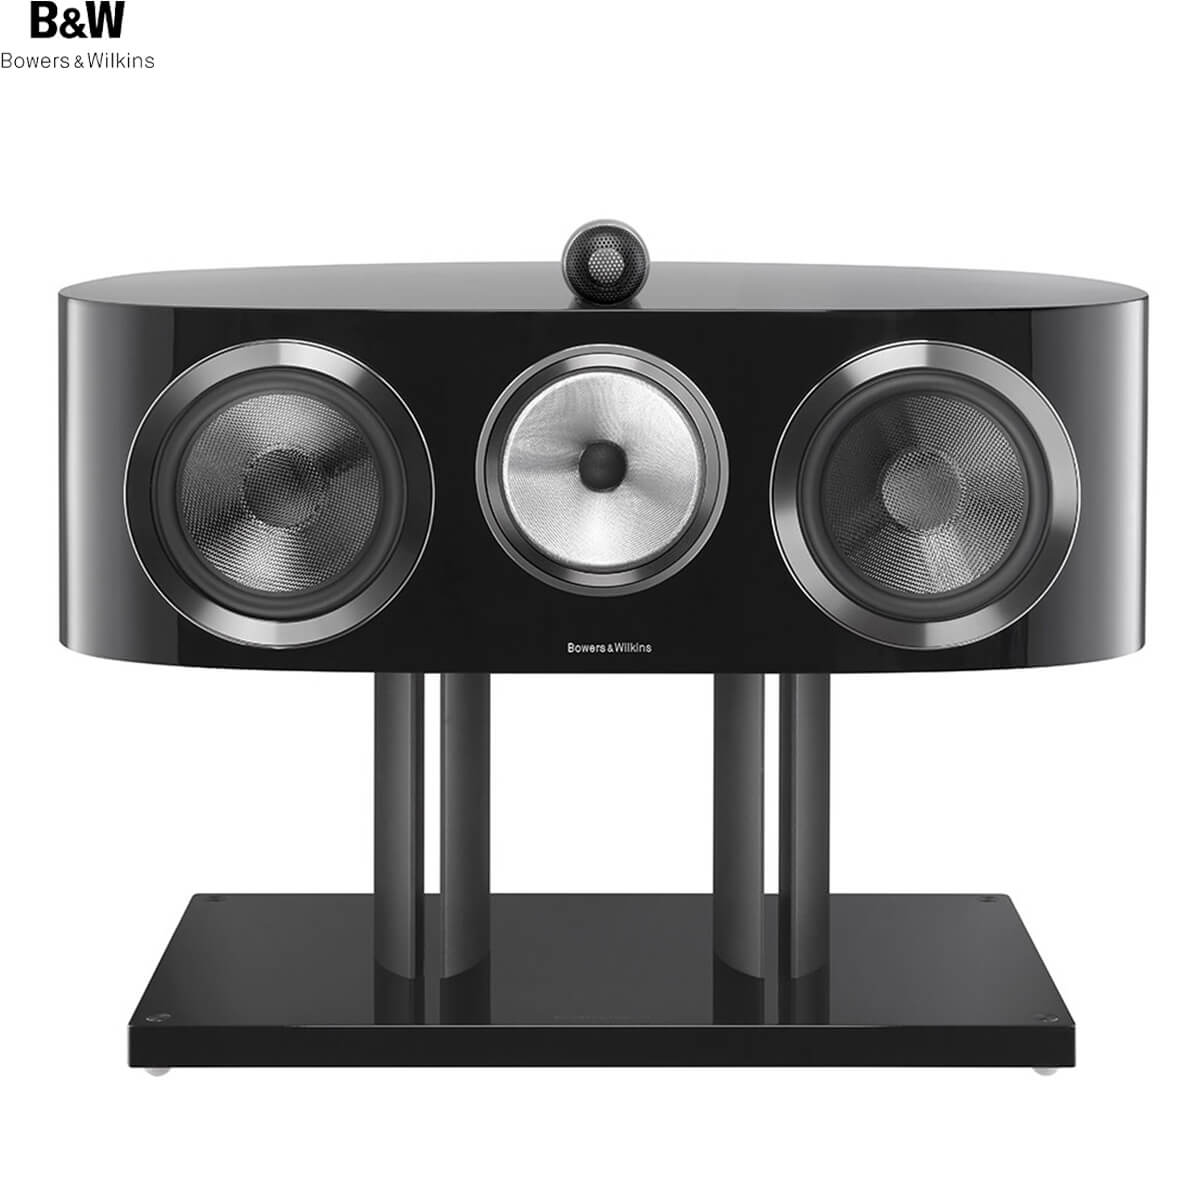 Bowers & Wilkins Formation HTM1 D3